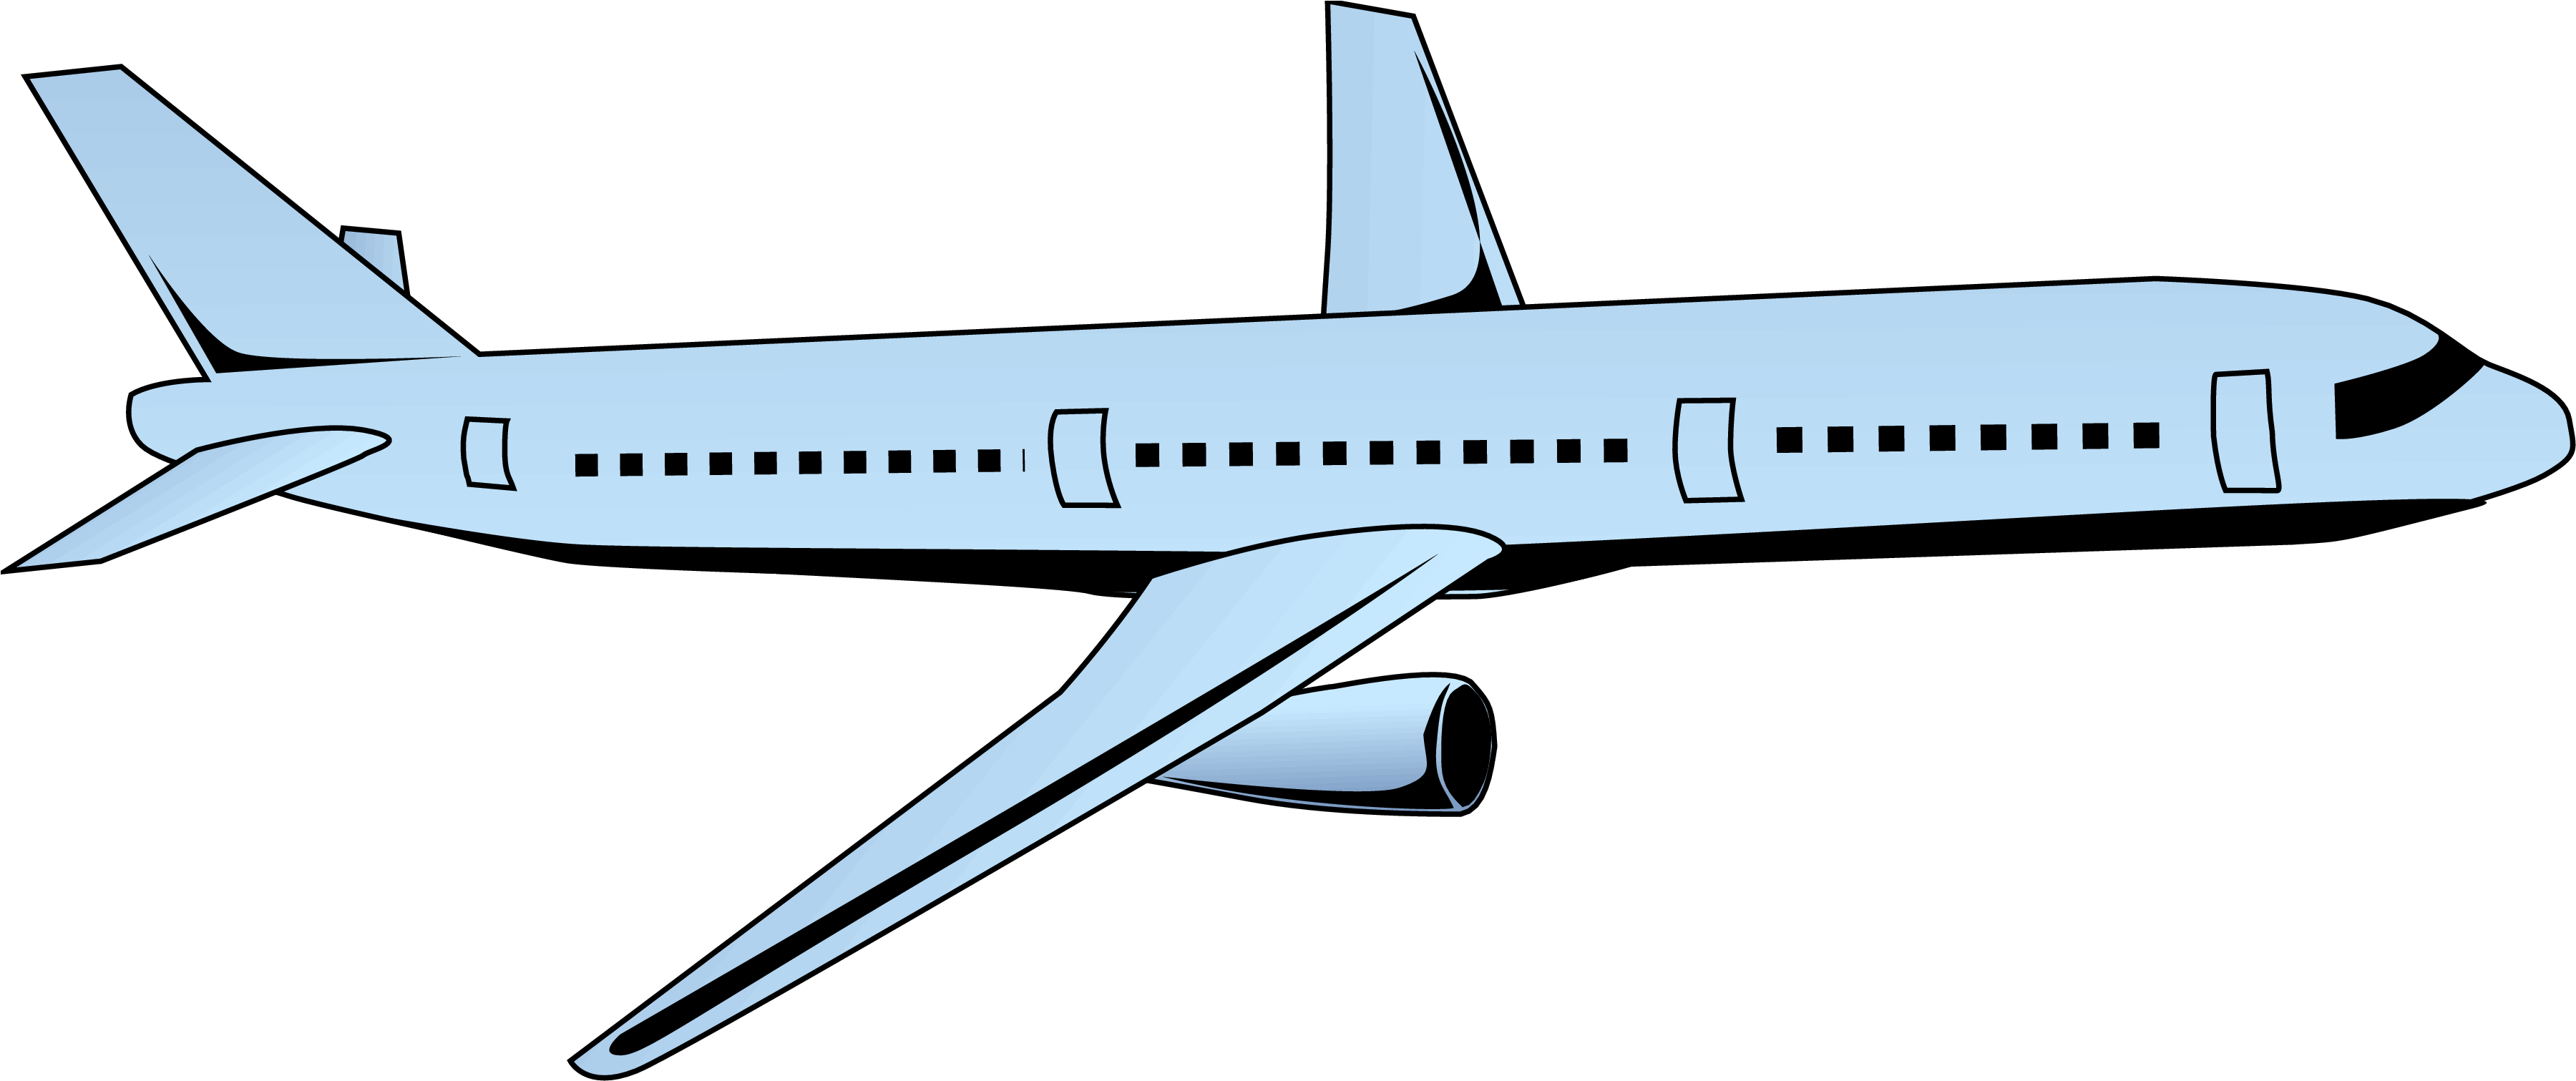 Plane Png Image Airplane Clip Art